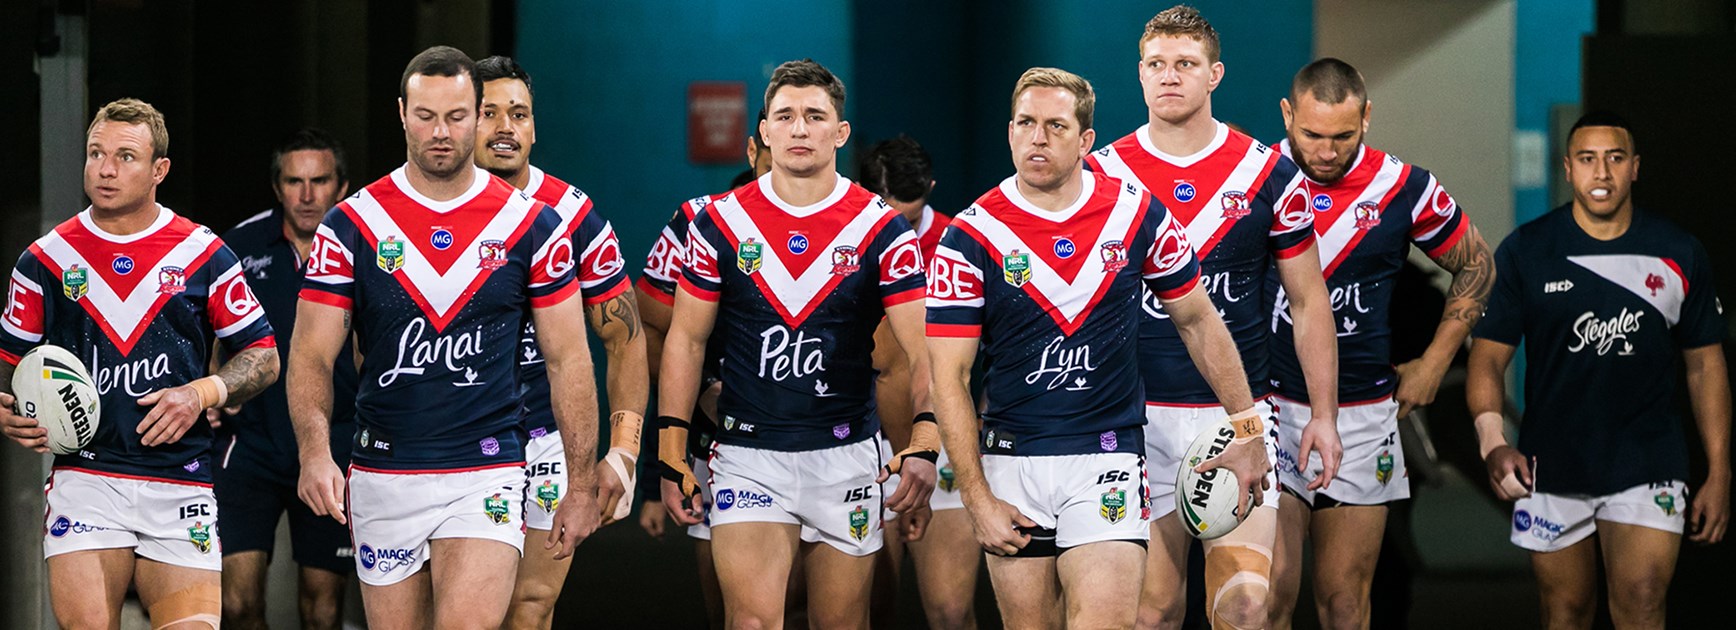 Roosters Road To Finals